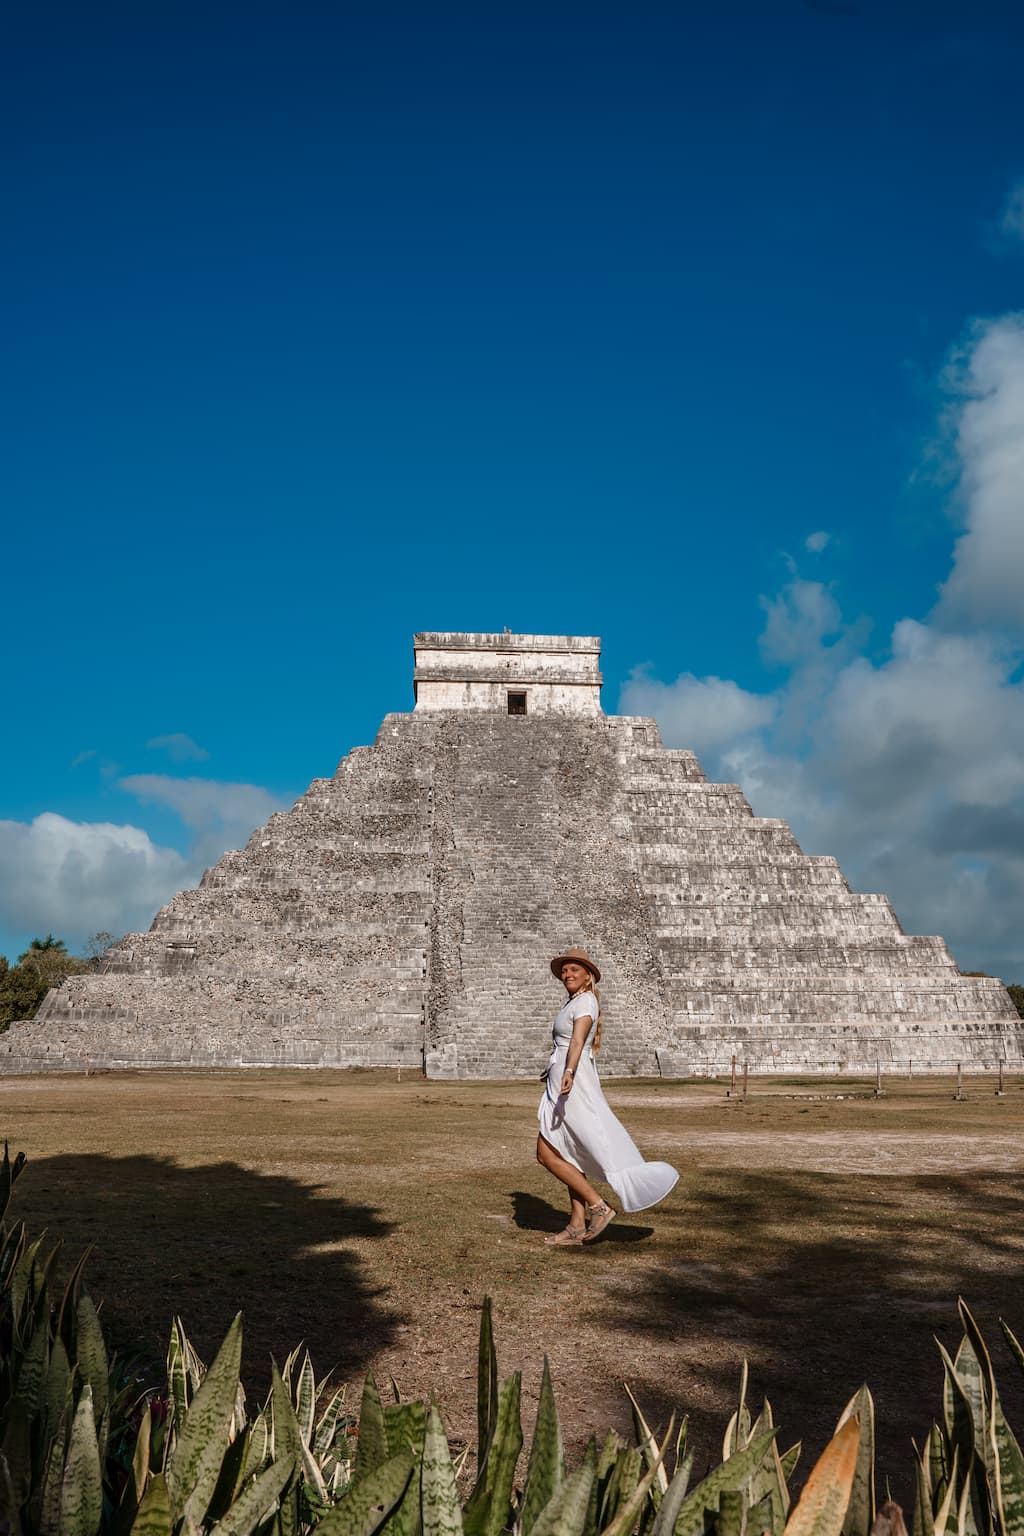 Chichen Itza tours from Cancun can also include a visit to Valladolid and a stop at a cenote.